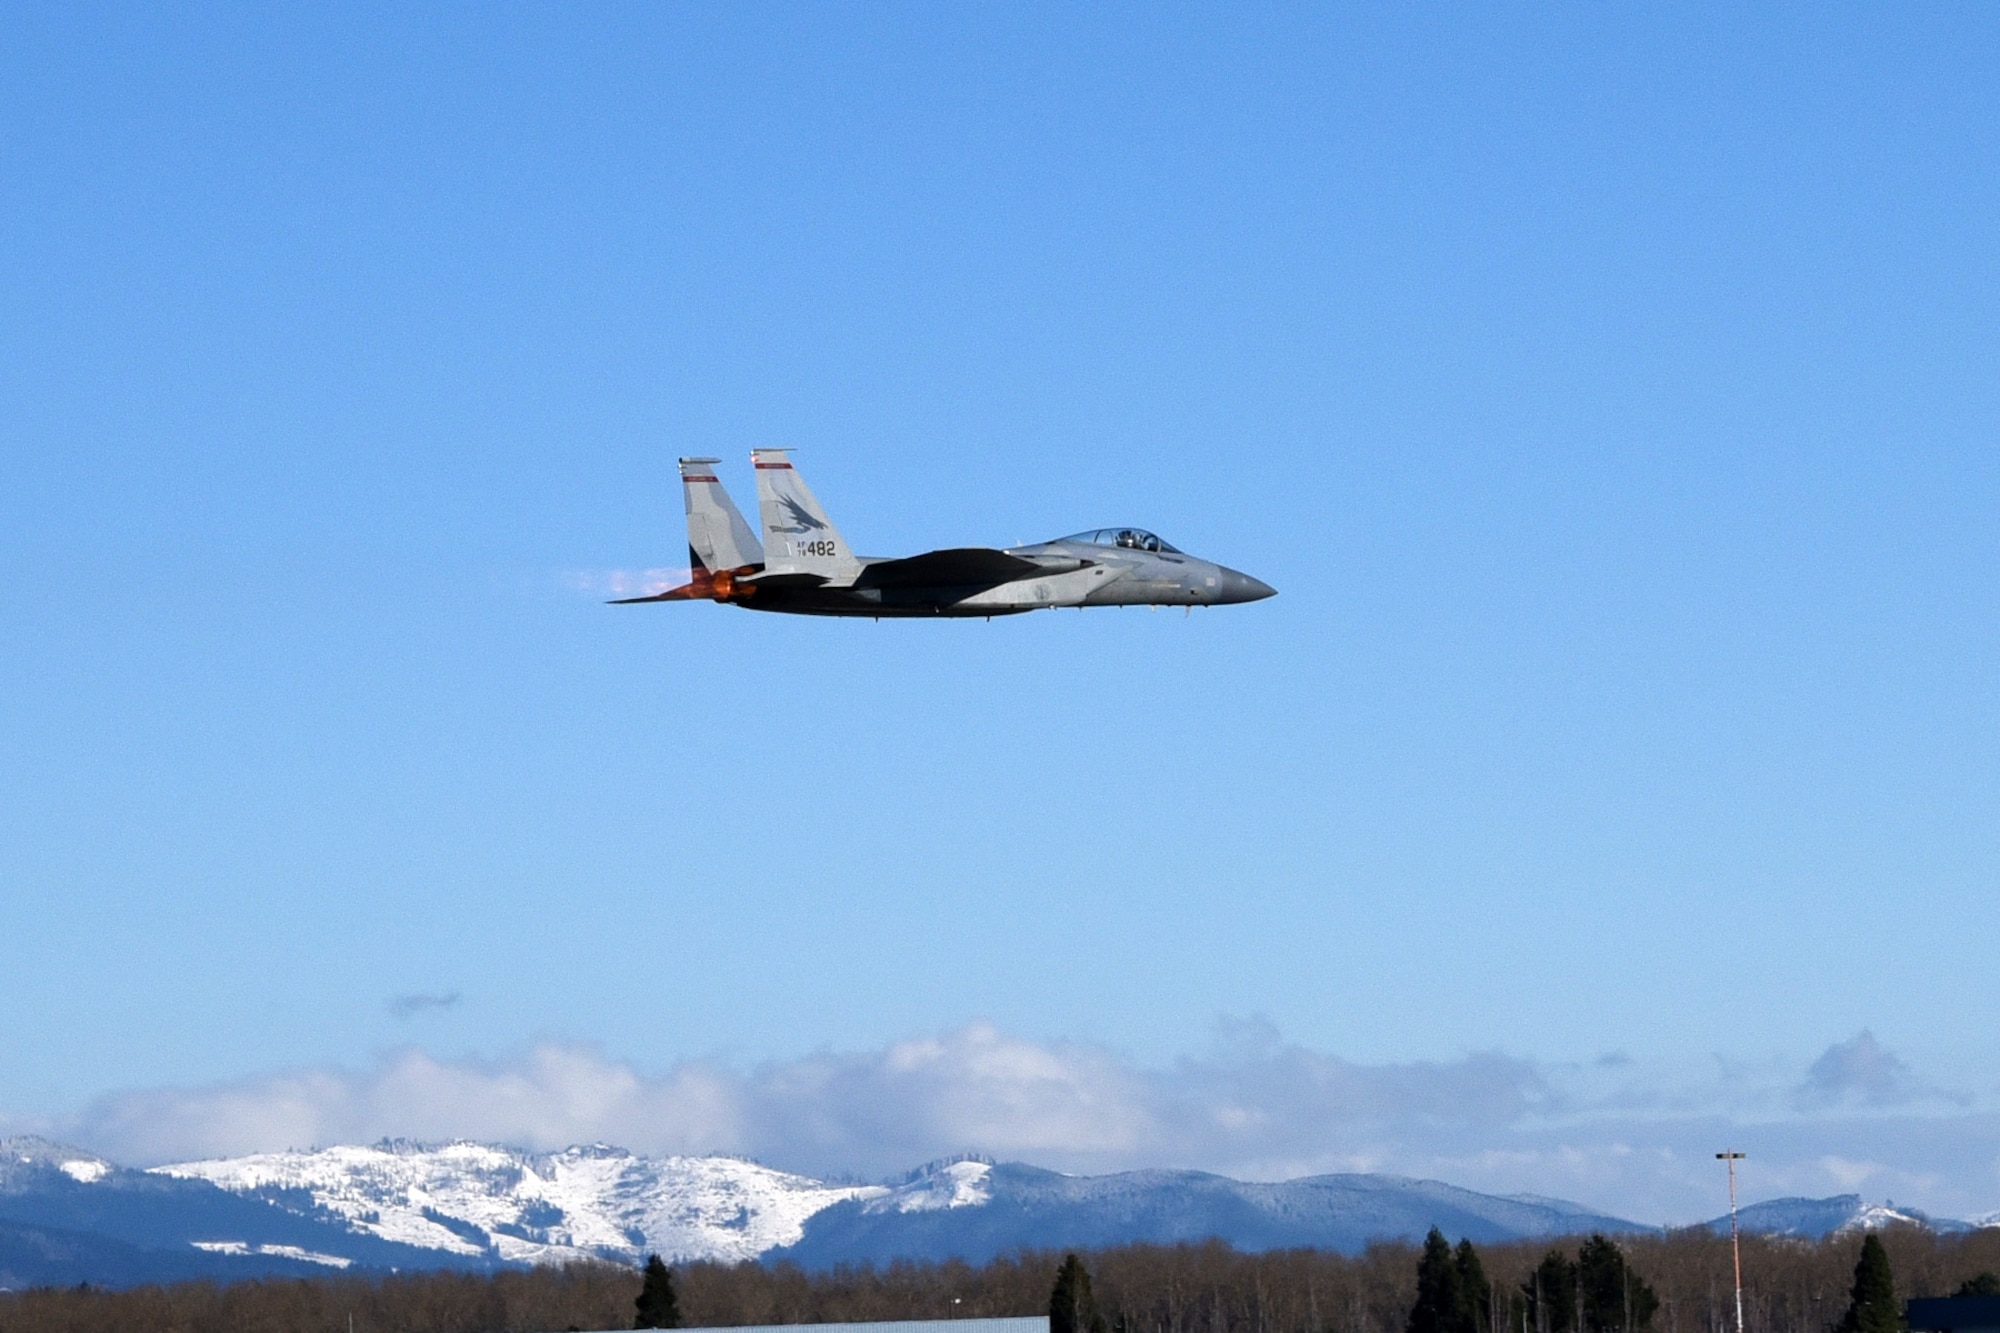 Lt. Col. Paul Shamy, 123rd Fighter Squadron, takes to flight in F-15C Eagle 78-482 for its first training mission with a new wing, Portland Air National Guard Base, Ore., Jan. 3, 2017. (U.S. Air National Guard photo by Senior Master Sgt. Shelly Davison, 142nd Fighter Wing Public Affairs)
